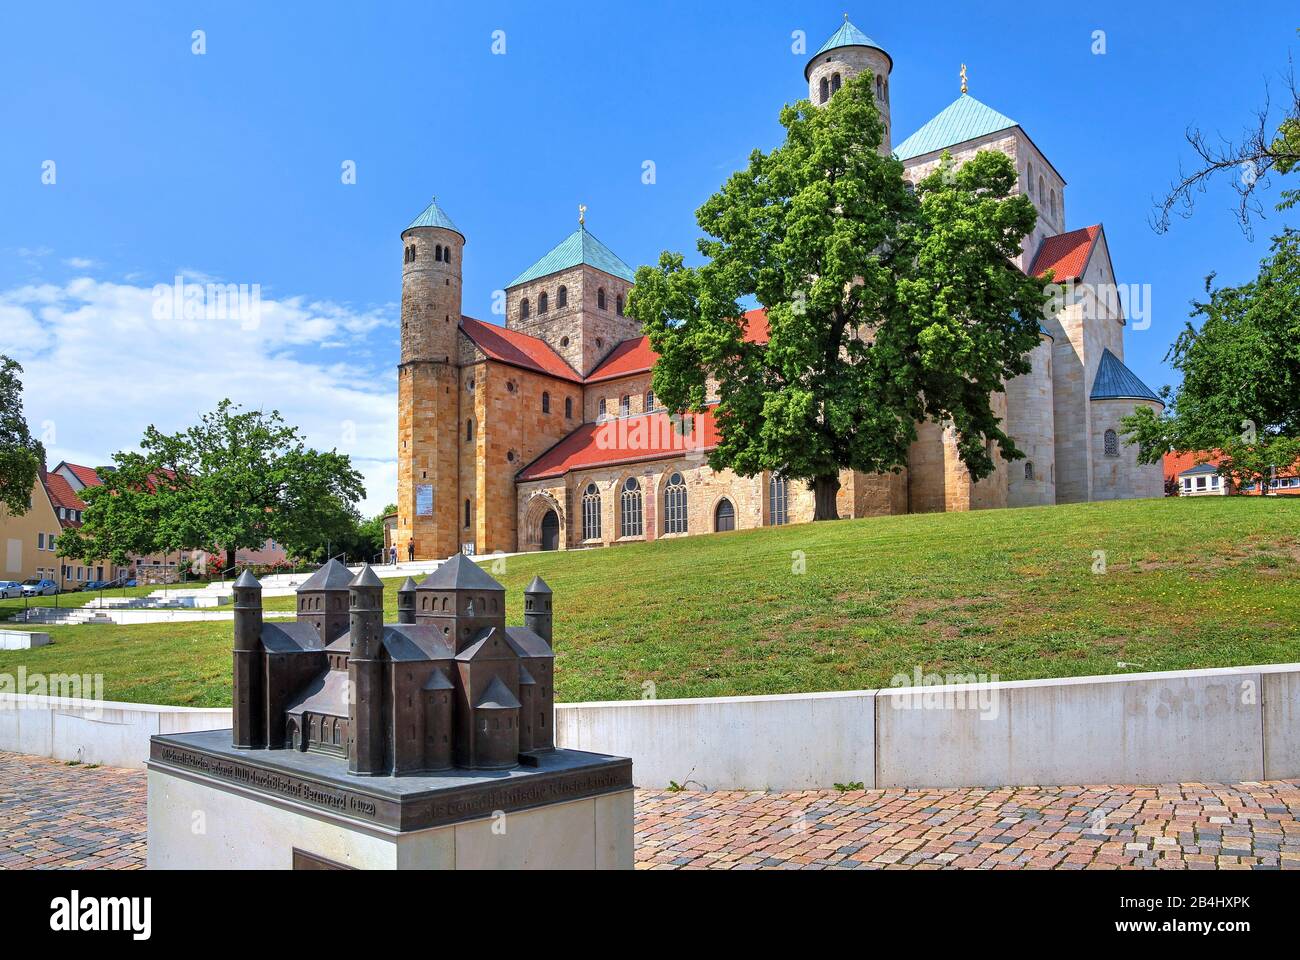 Early Romanesque church of St. Michael with church model, Hildesheim, Lower Saxony, Germany Stock Photo